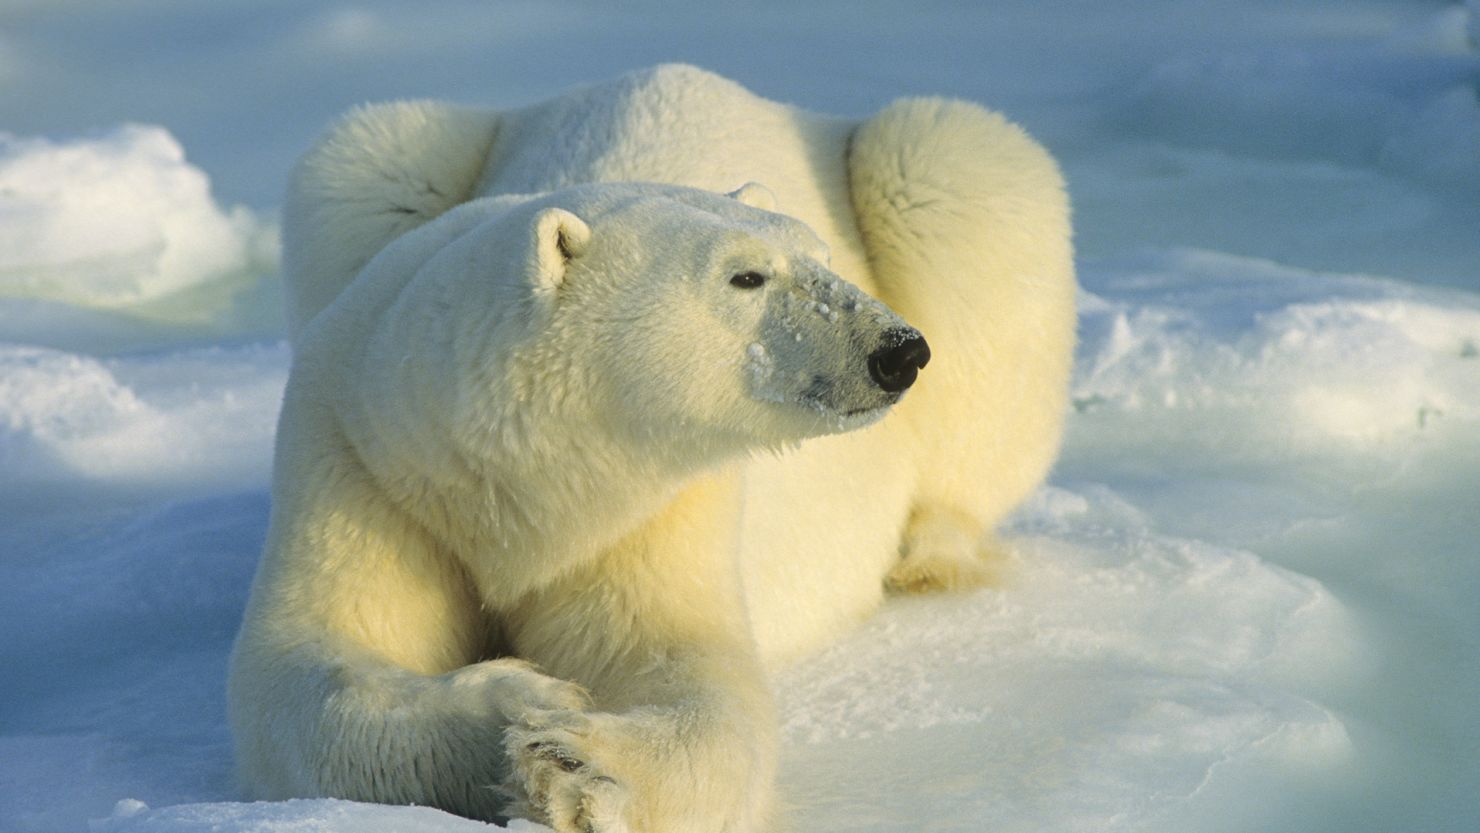 This is not one of the polar bears that trapped the Russian scientists